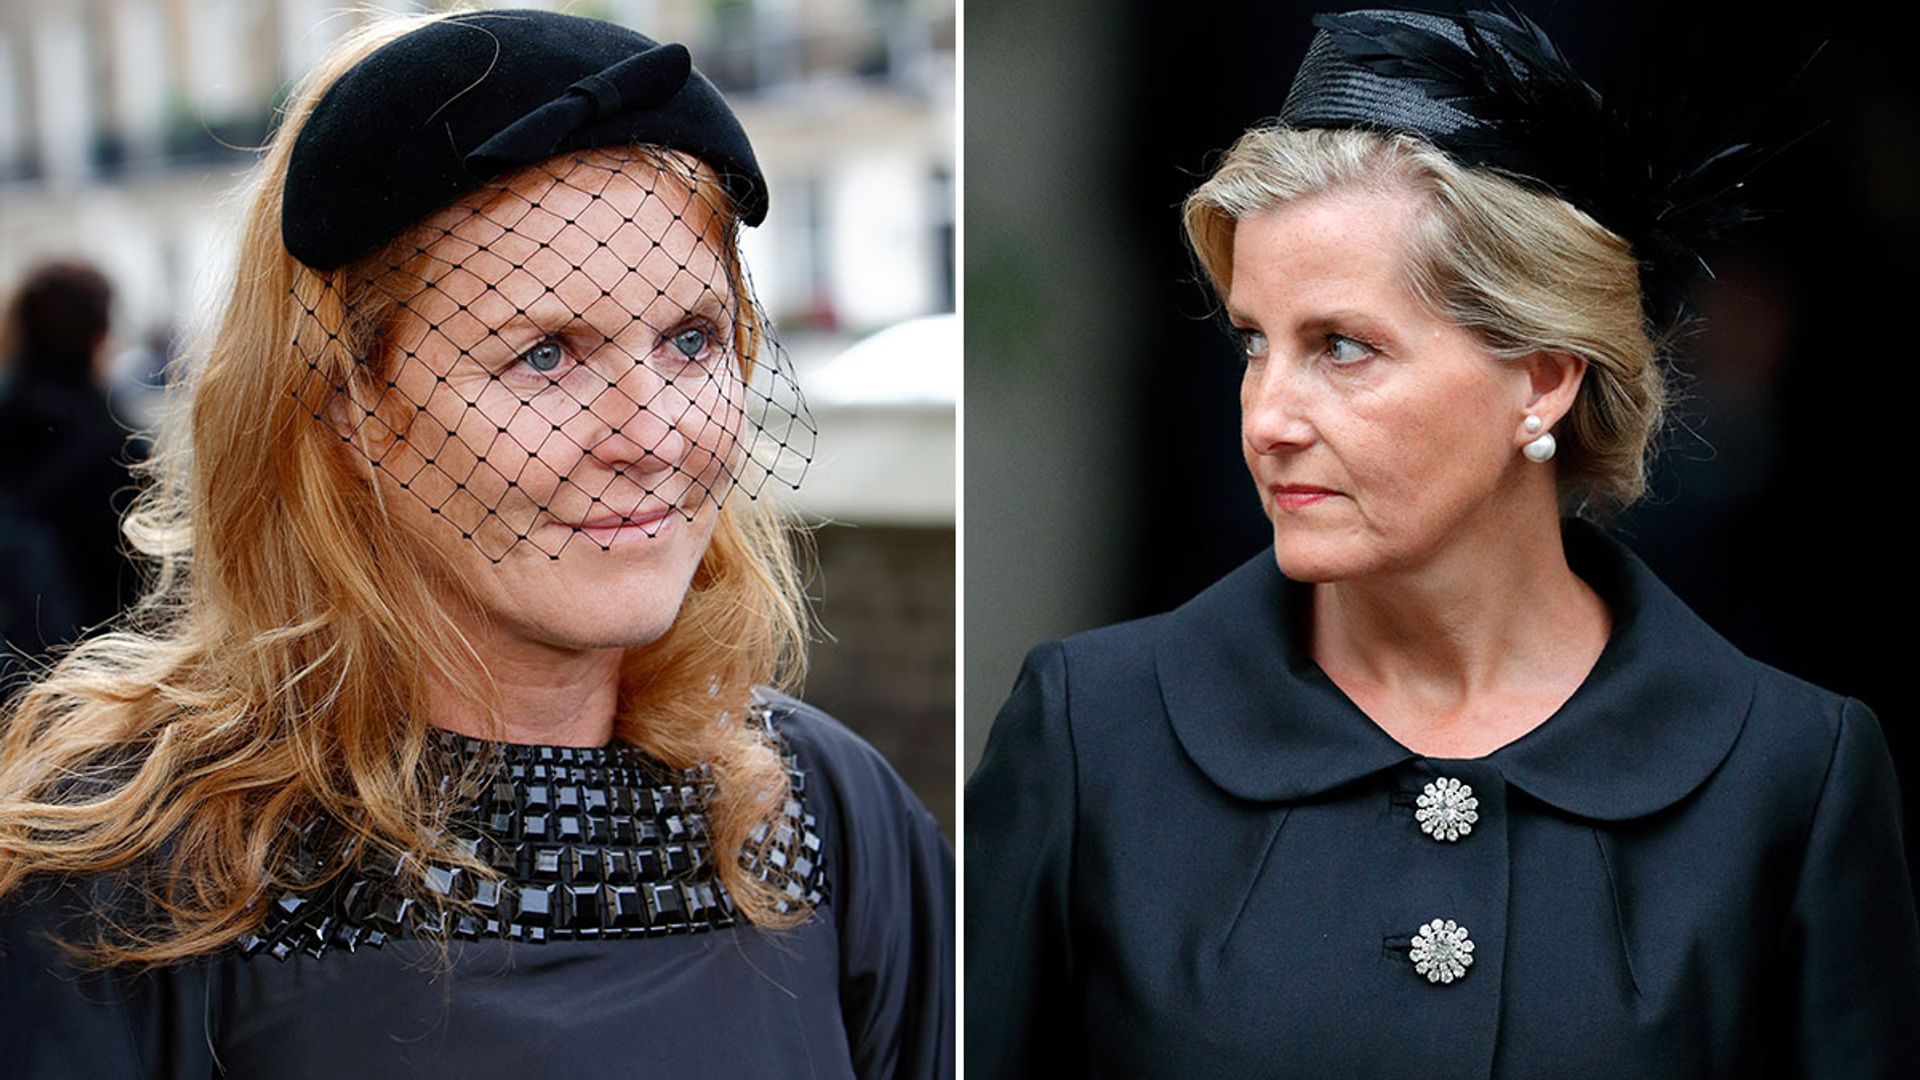 Sophie Wessex and Sarah Ferguson gather to pay respects to family friend after sad death